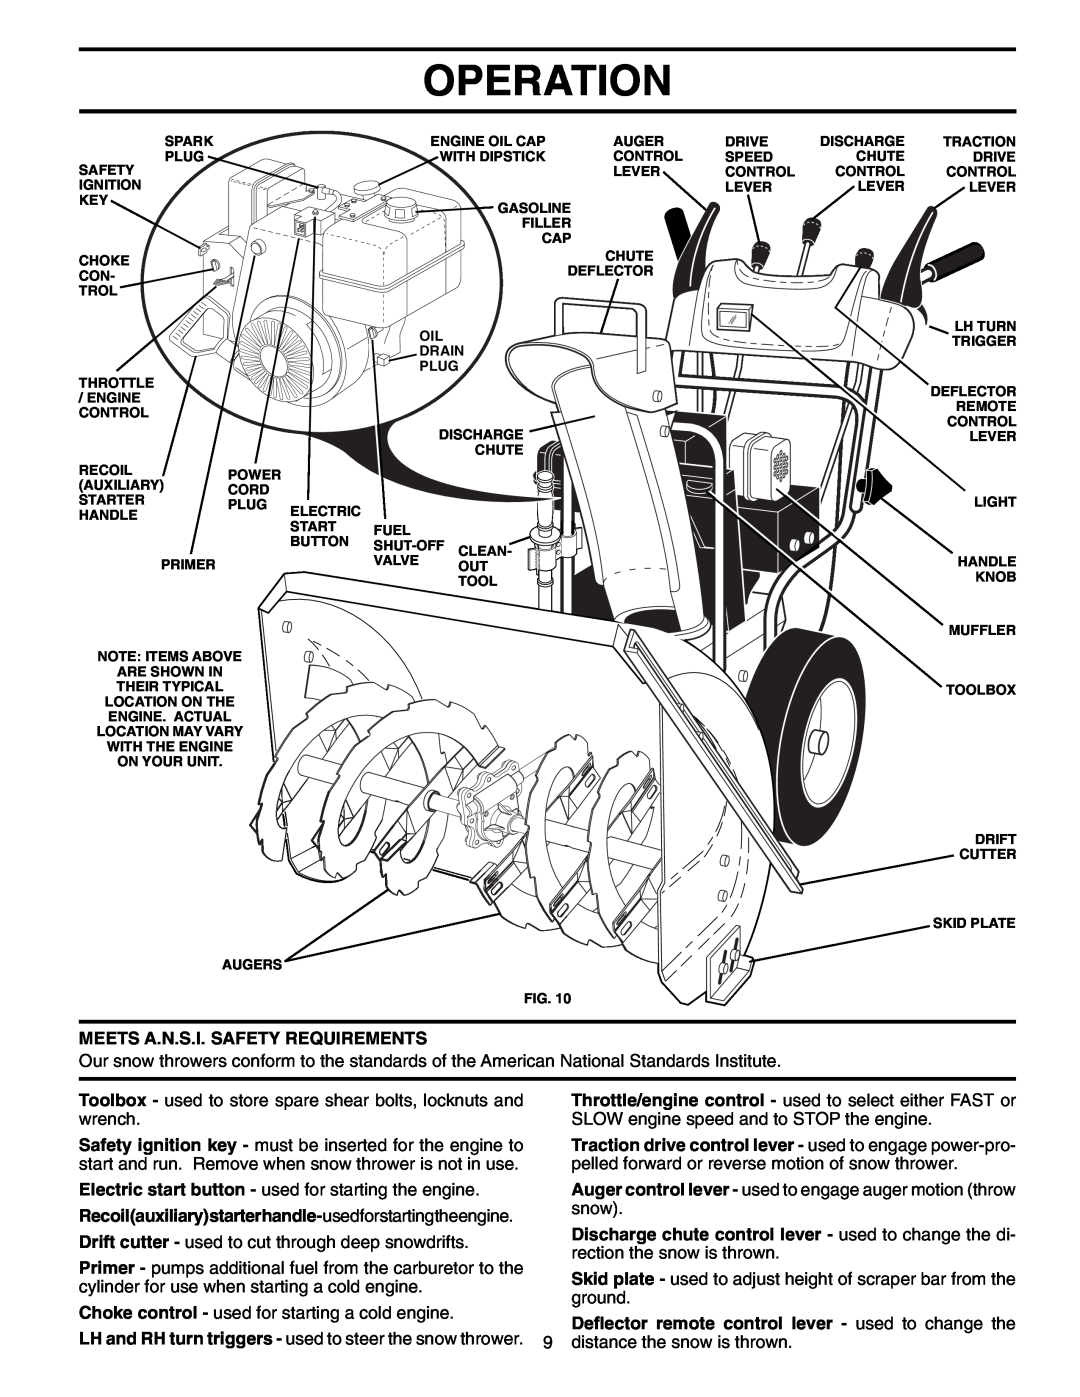 Yard Machines 961940001 owner manual Operation, Meets A.N.S.I. Safety Requirements 